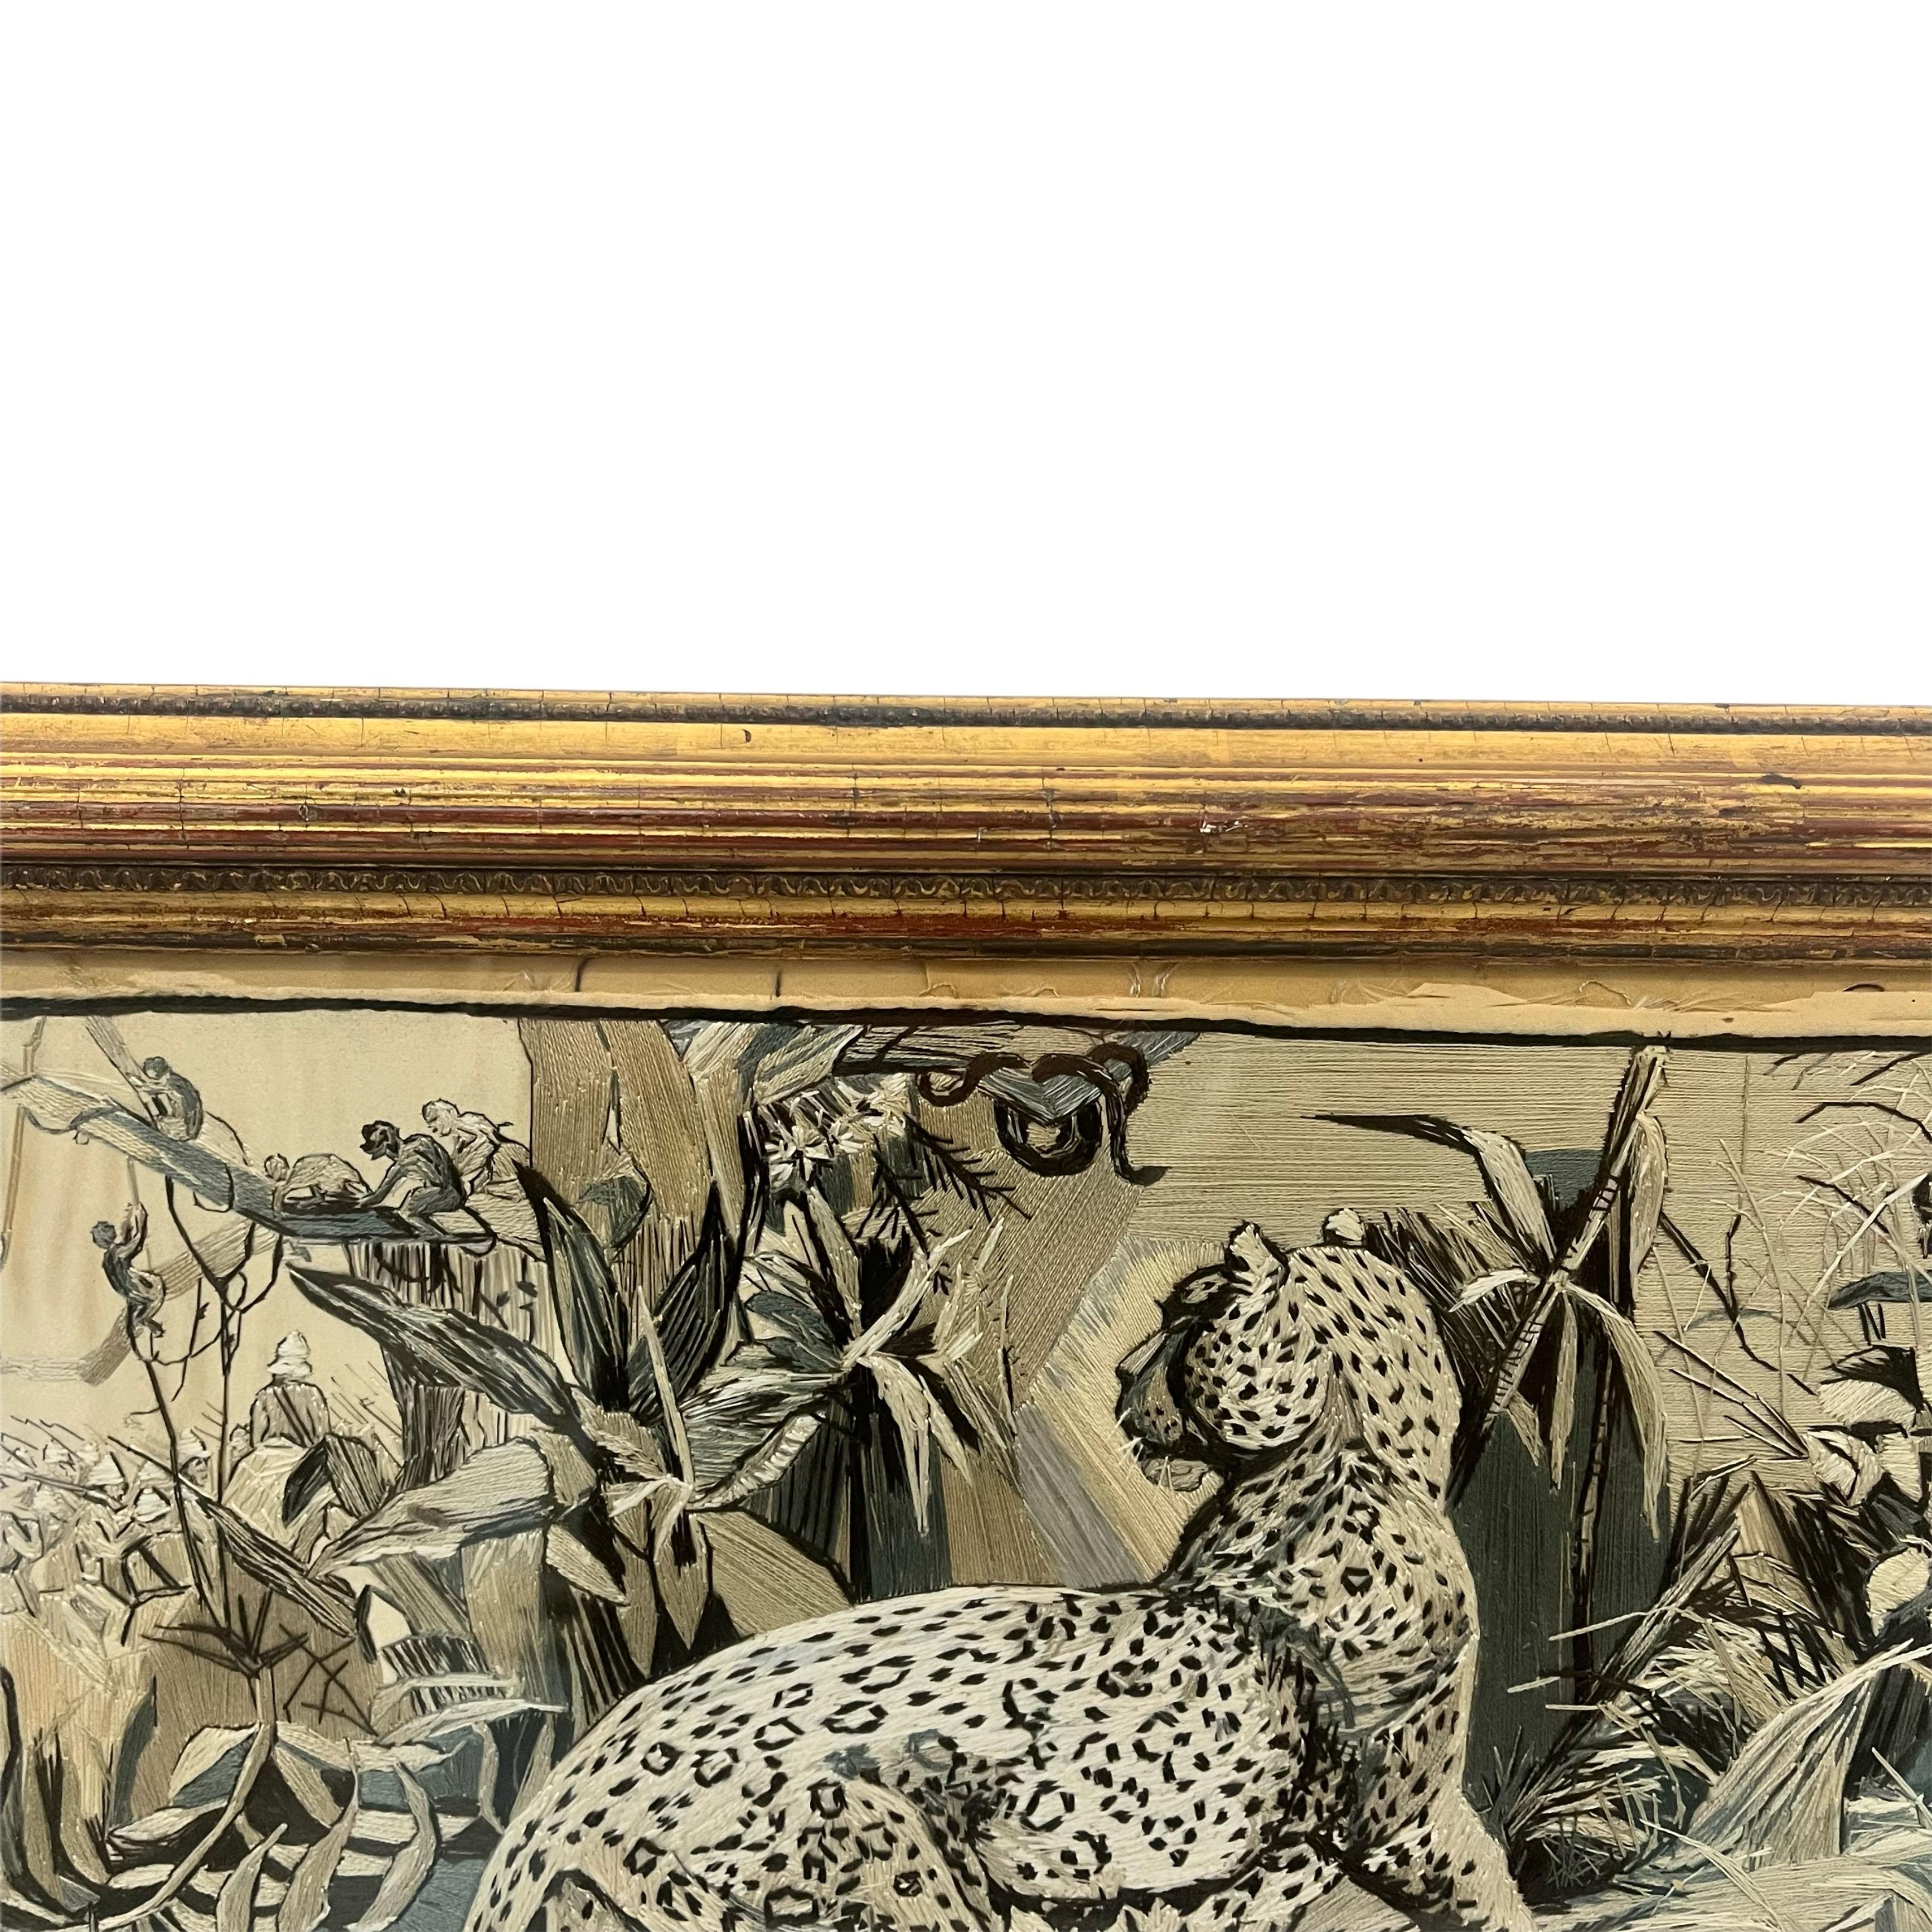 Under glass, depicting two Leopards looking to the background, where a group of soldiers are congregated, monkey's and snakes take refuge in the trees above. Below, the phrase 'In The Enemy's Country' is embroidered. 

In a period moulded gilt wood